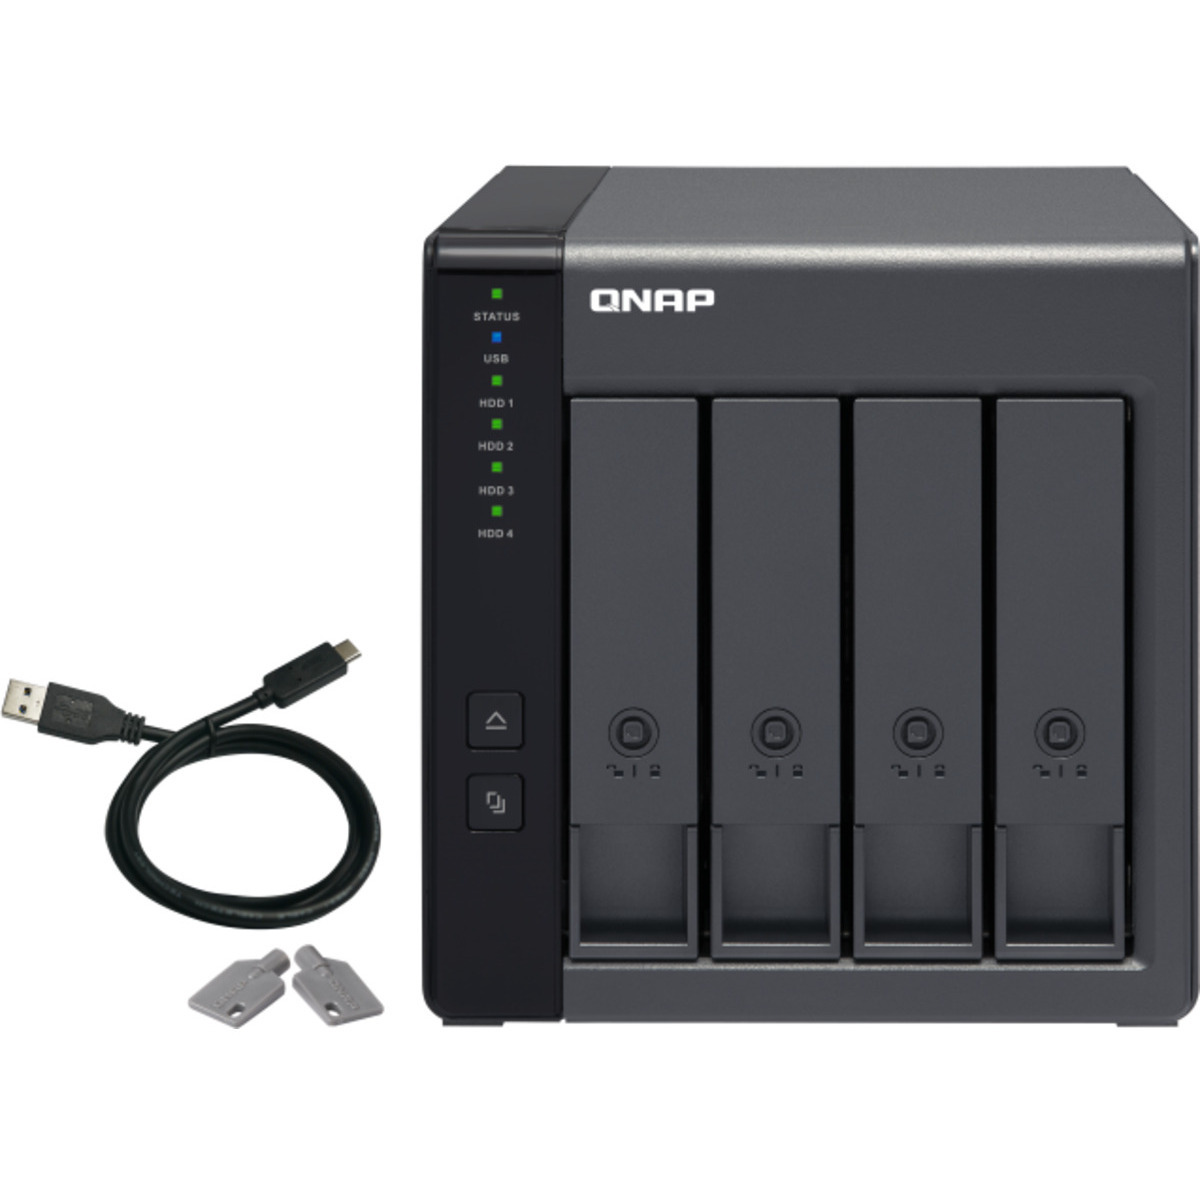 QNAP TR-004 External Expansion Drive 32tb 4-Bay Desktop Multimedia / Power User / Business Expansion Enclosure 2x16tb Seagate IronWolf Pro ST16000NT001 3.5 7200rpm SATA 6Gb/s HDD NAS Class Drives Installed - Burn-In Tested - ON SALE TR-004 External Expansion Drive